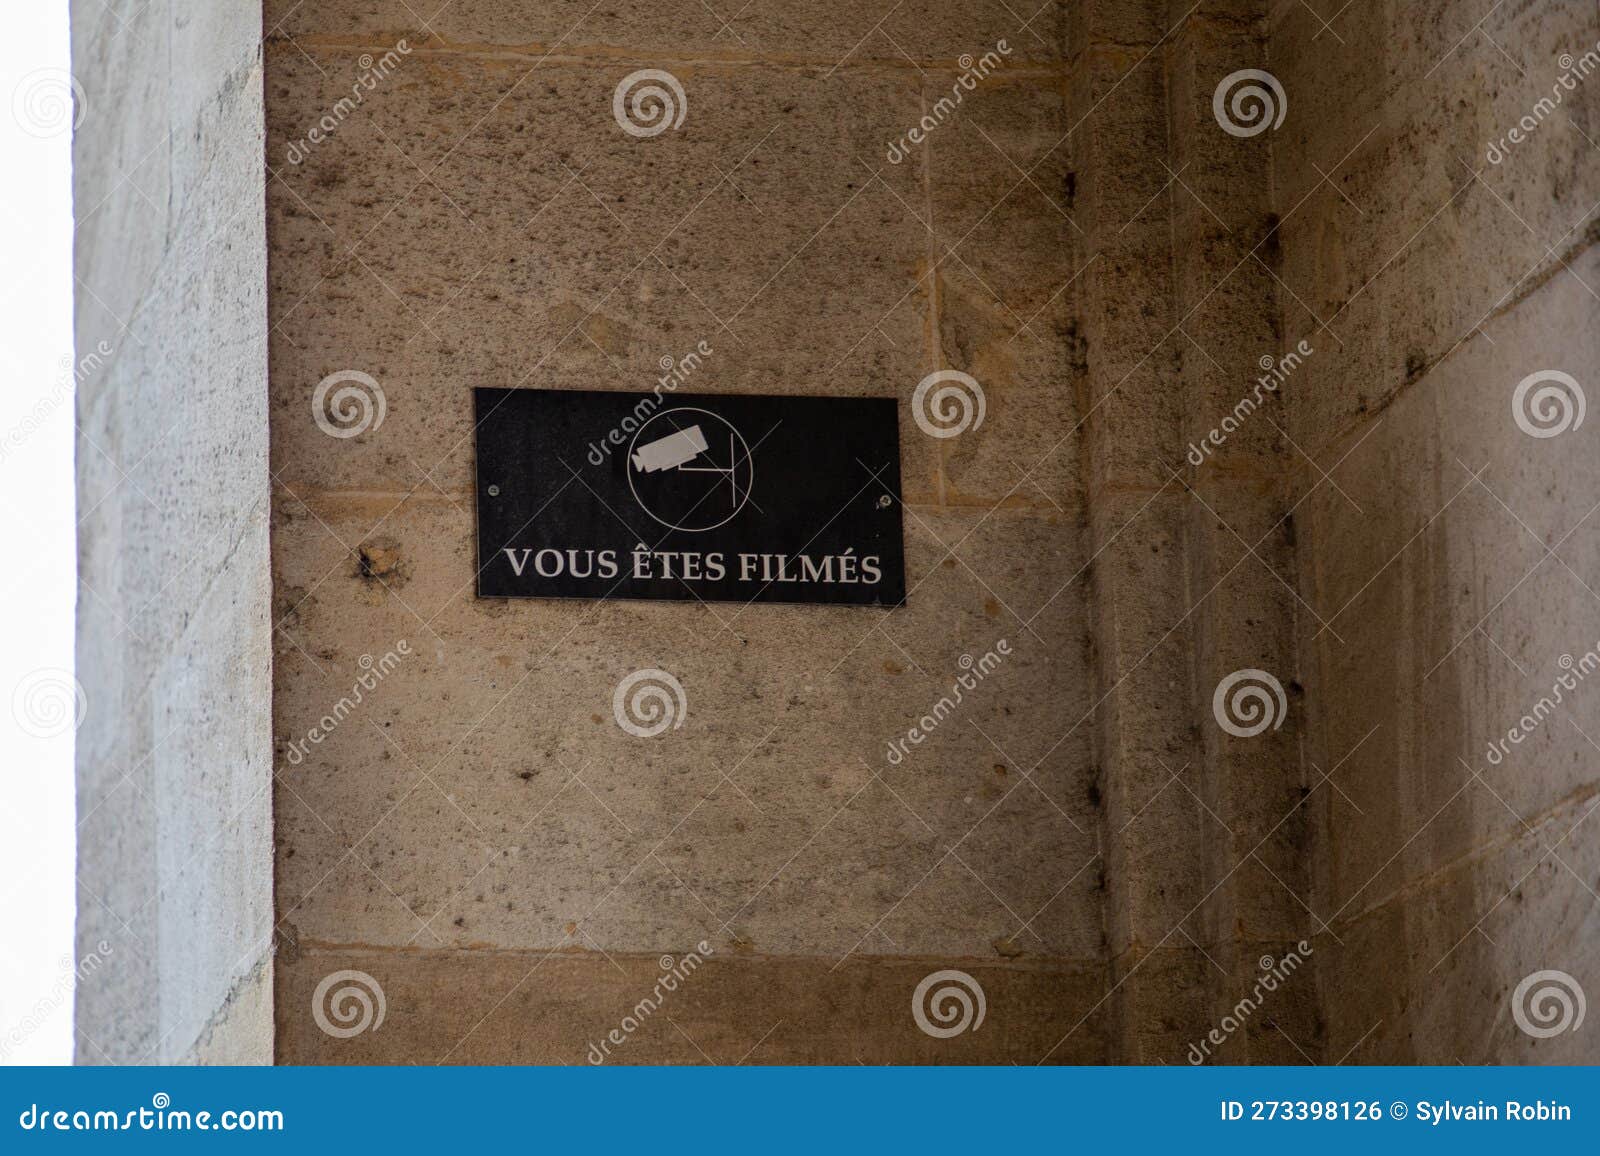 vous etes filmes french text and cctv sign icon means you are filmed in wall building